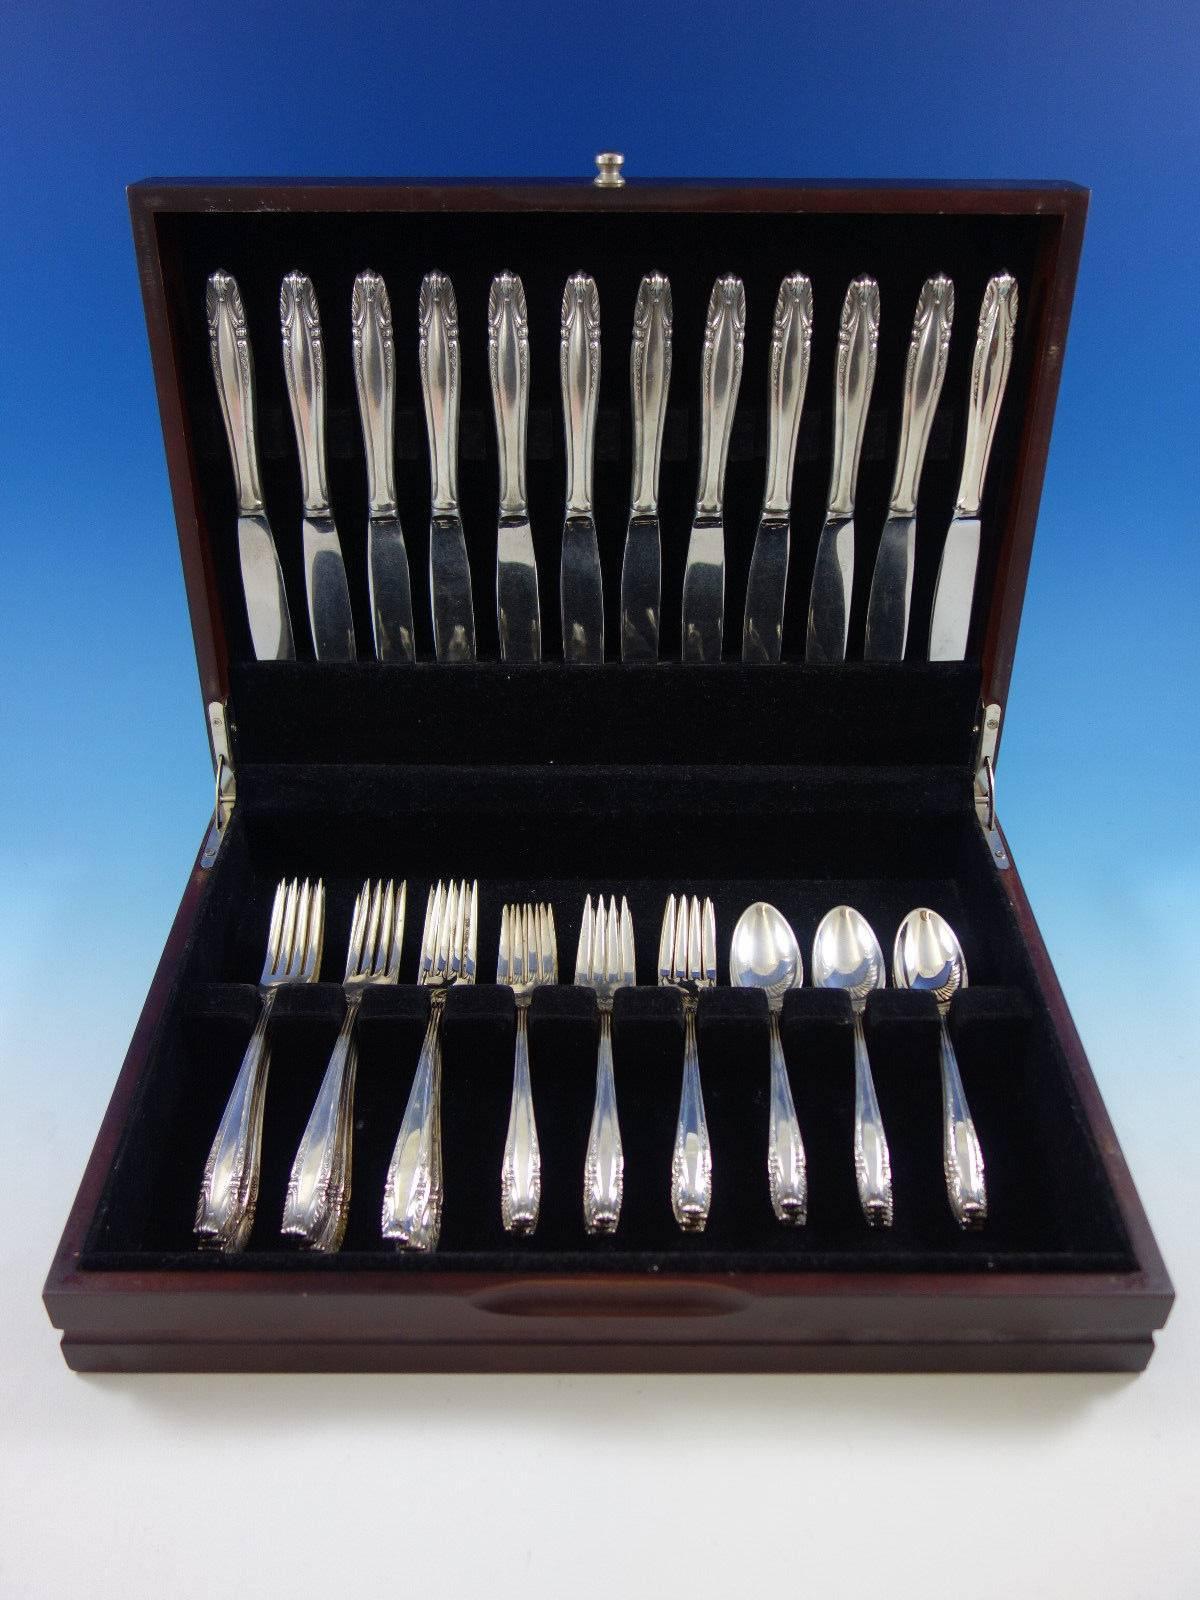 Stradivari by Wallace sterling silver flatware set - 48 pieces. This set includes: 

12 knives, 9